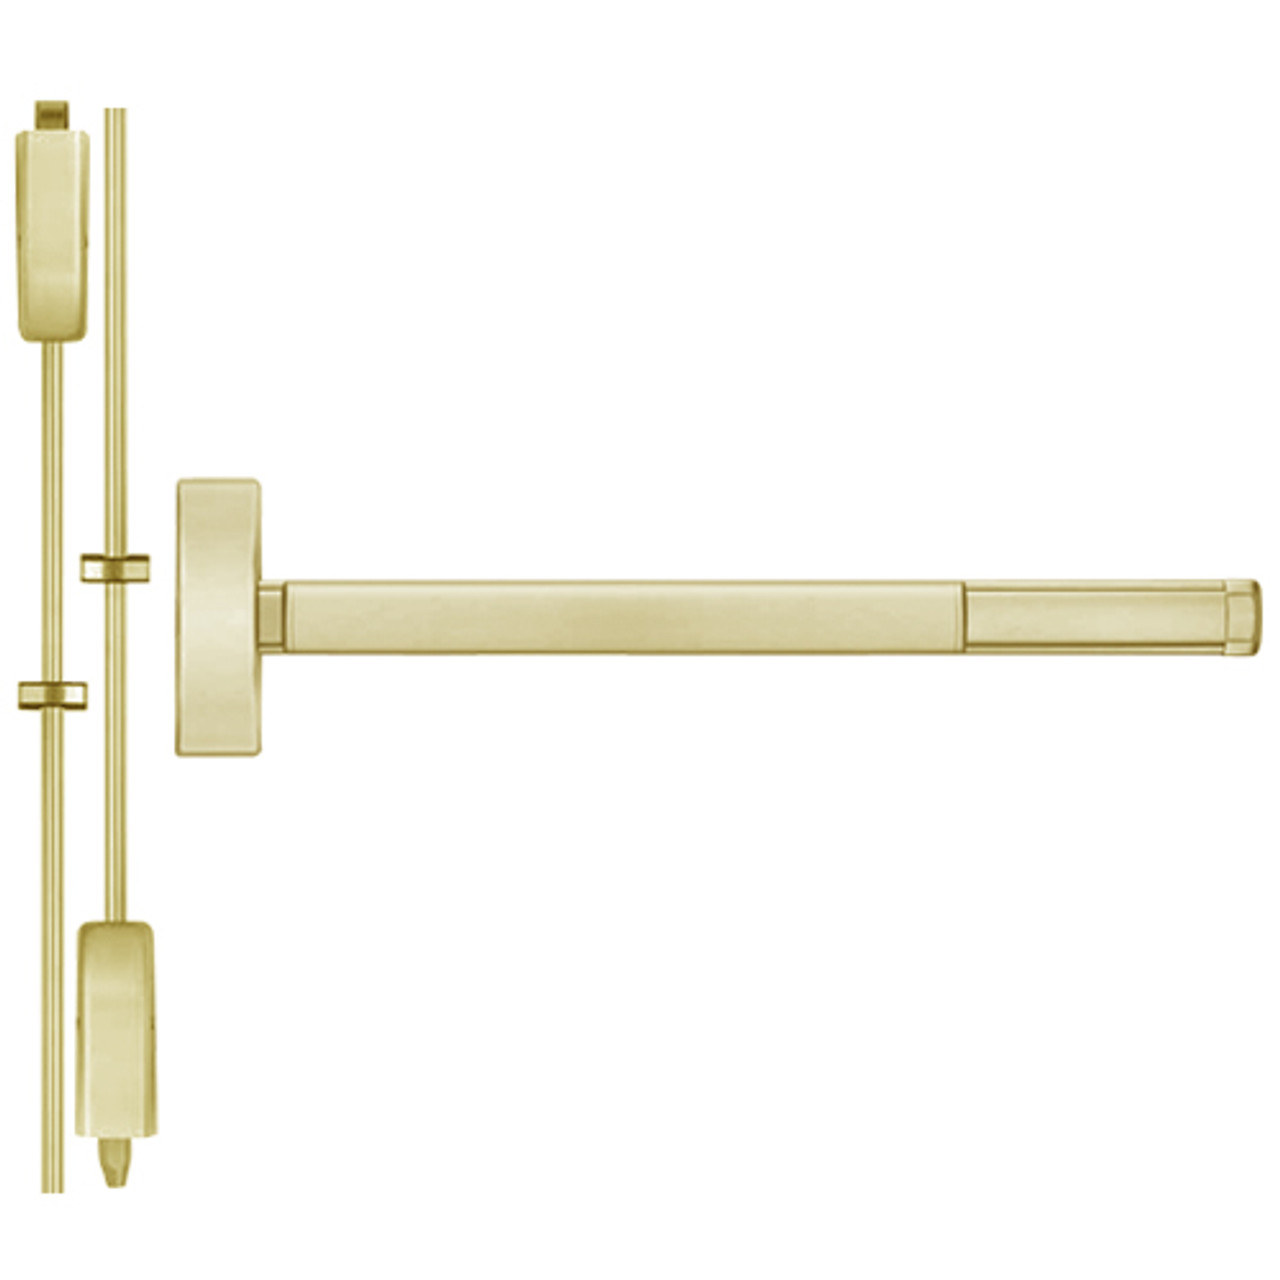 TSFL2202LBR-606-36 PHI 2200 Series Apex Surface Vertical Rod Device with Touchbar Monitoring Switch Prepped for Dummy Trim in Satin Brass Finish